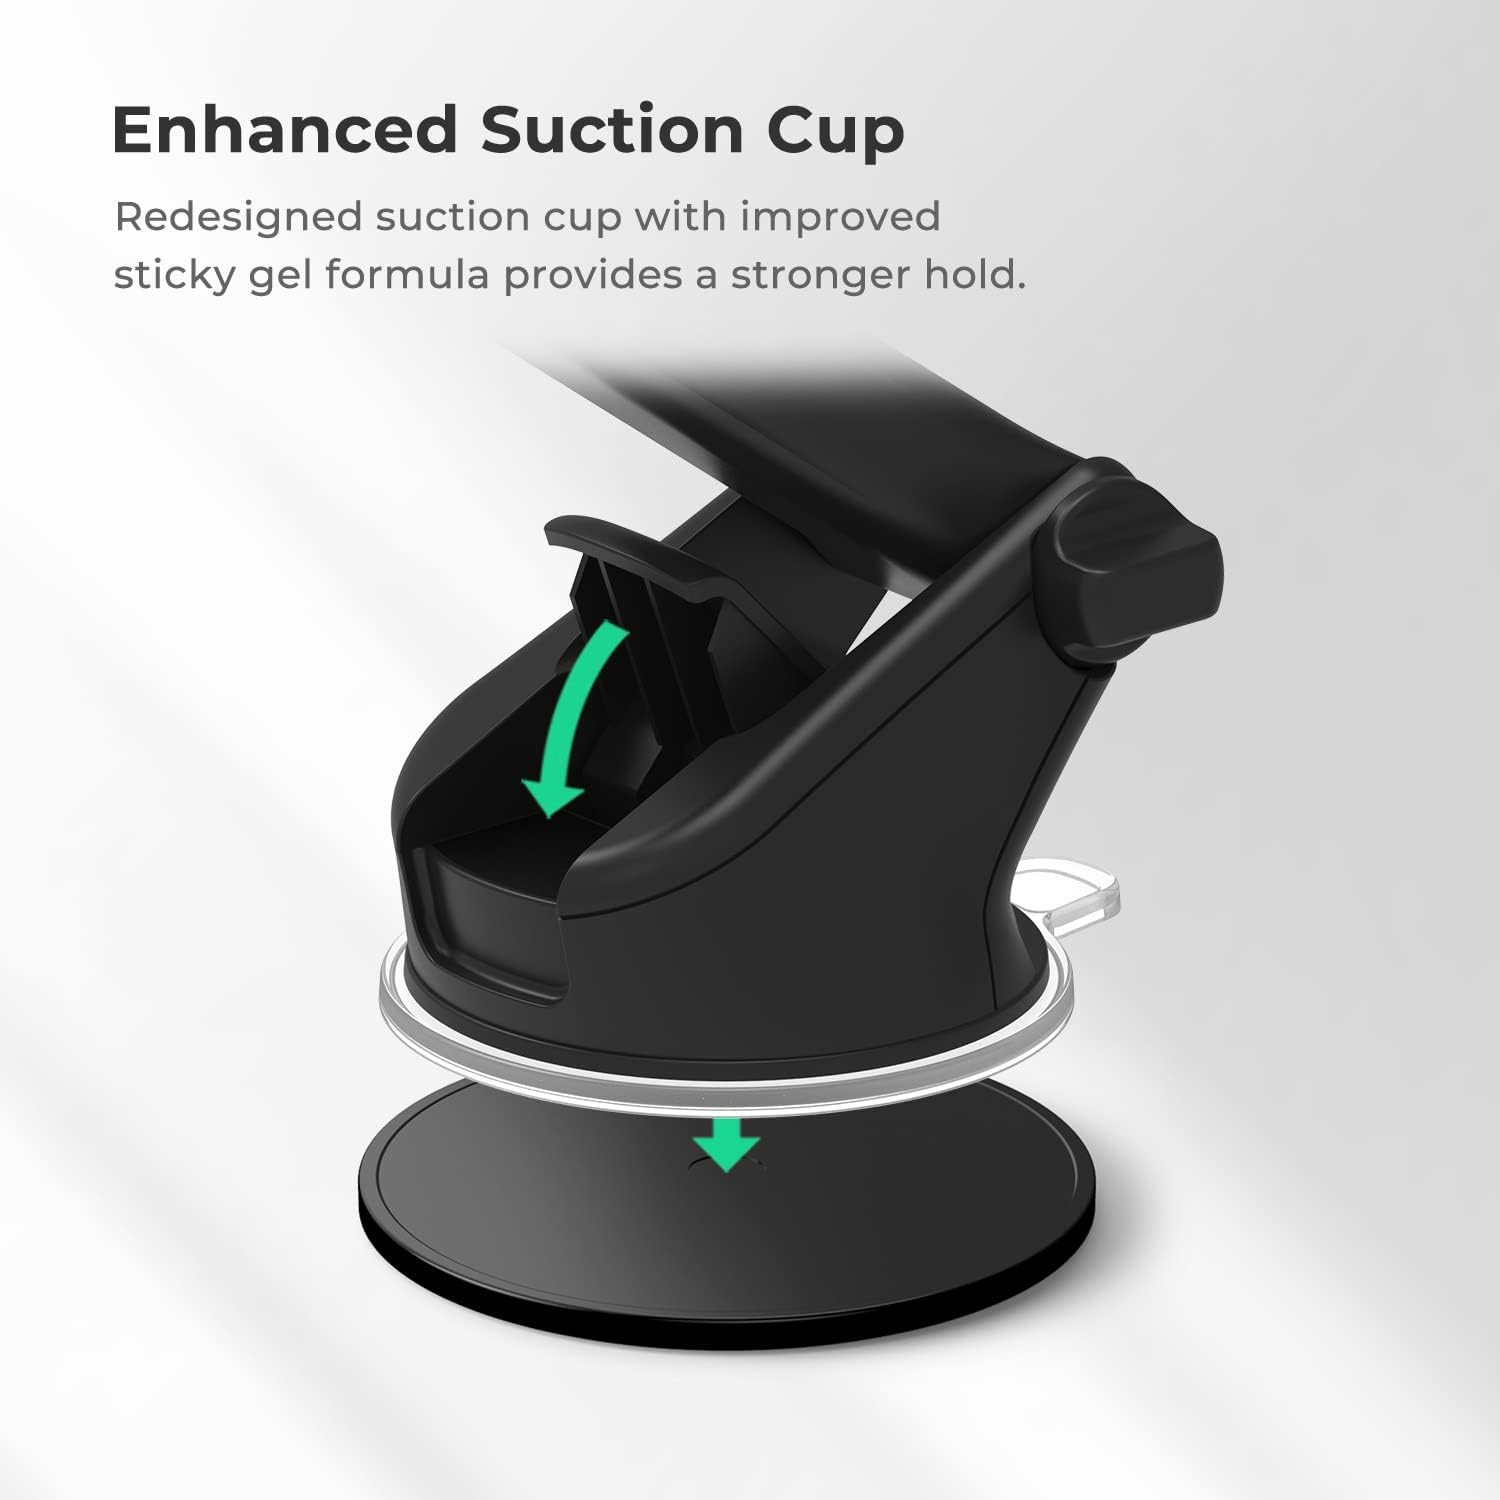 Analyzing iOttie Easy One Touch 5 Dashboard & Windshield Universal Car Mount Phone Holder Desk Stand